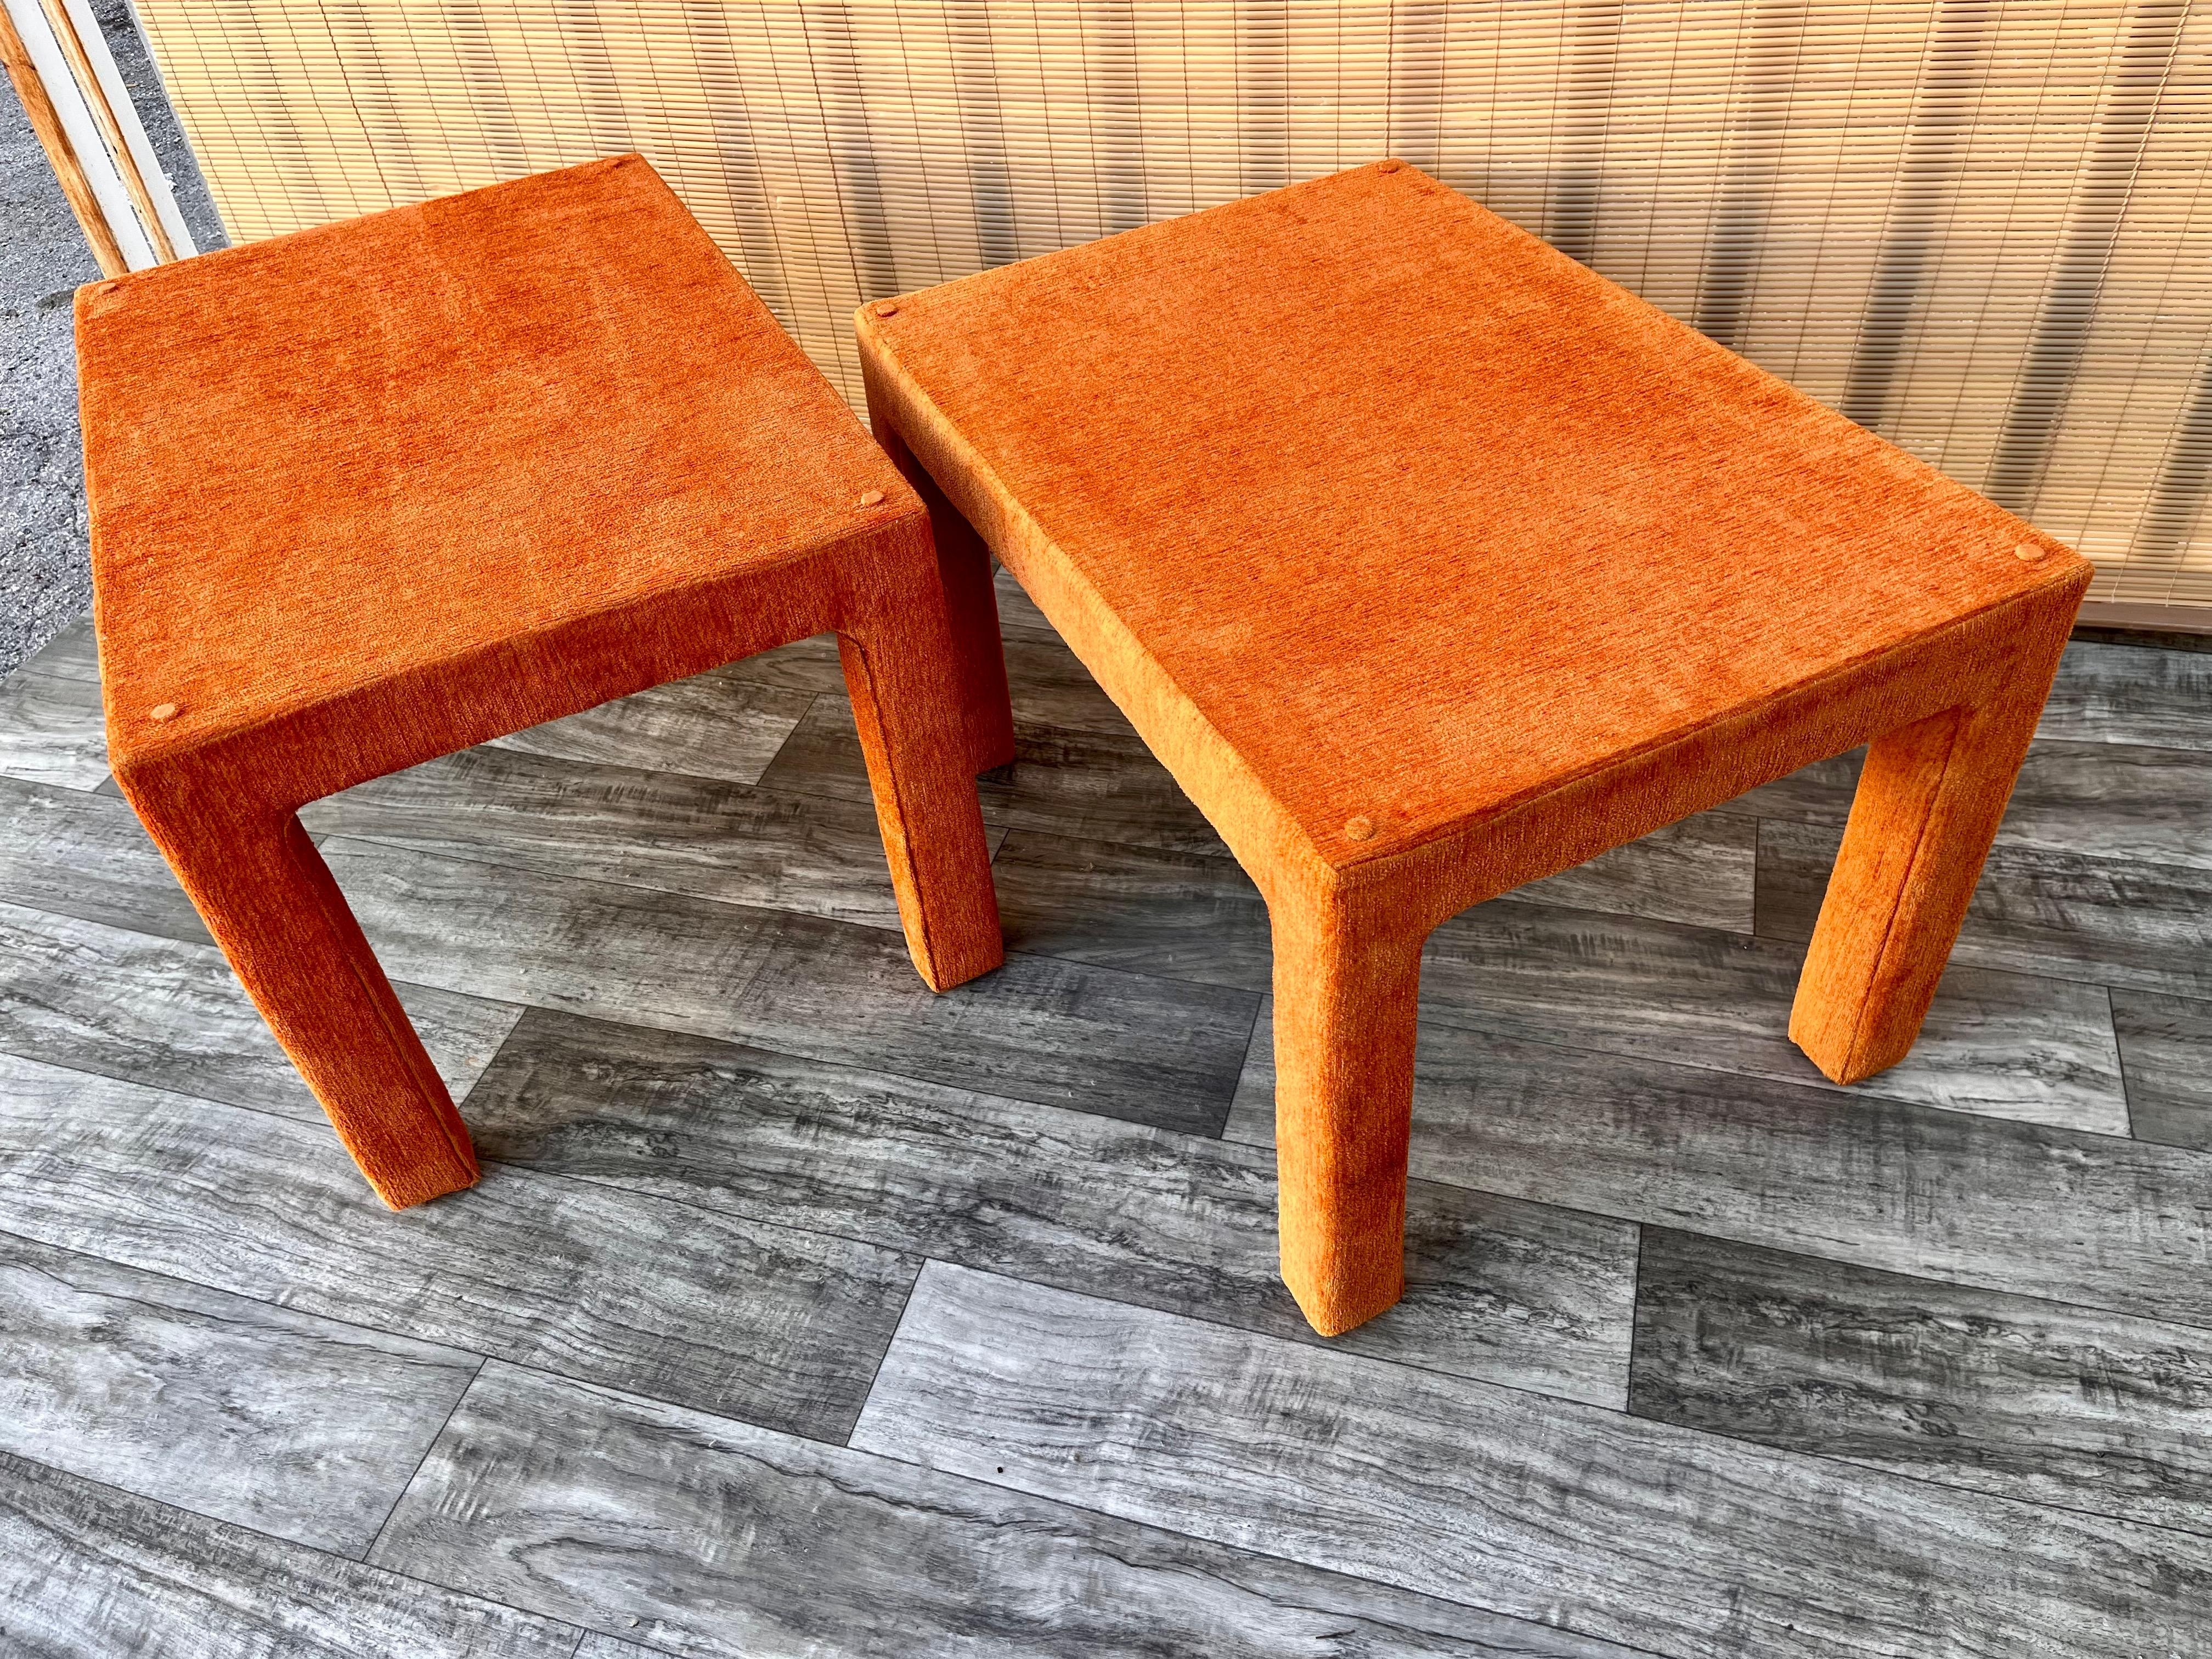 Pair of Mid-Century Modern Fully Upholstered Side Tables, circa 1970s For Sale 10